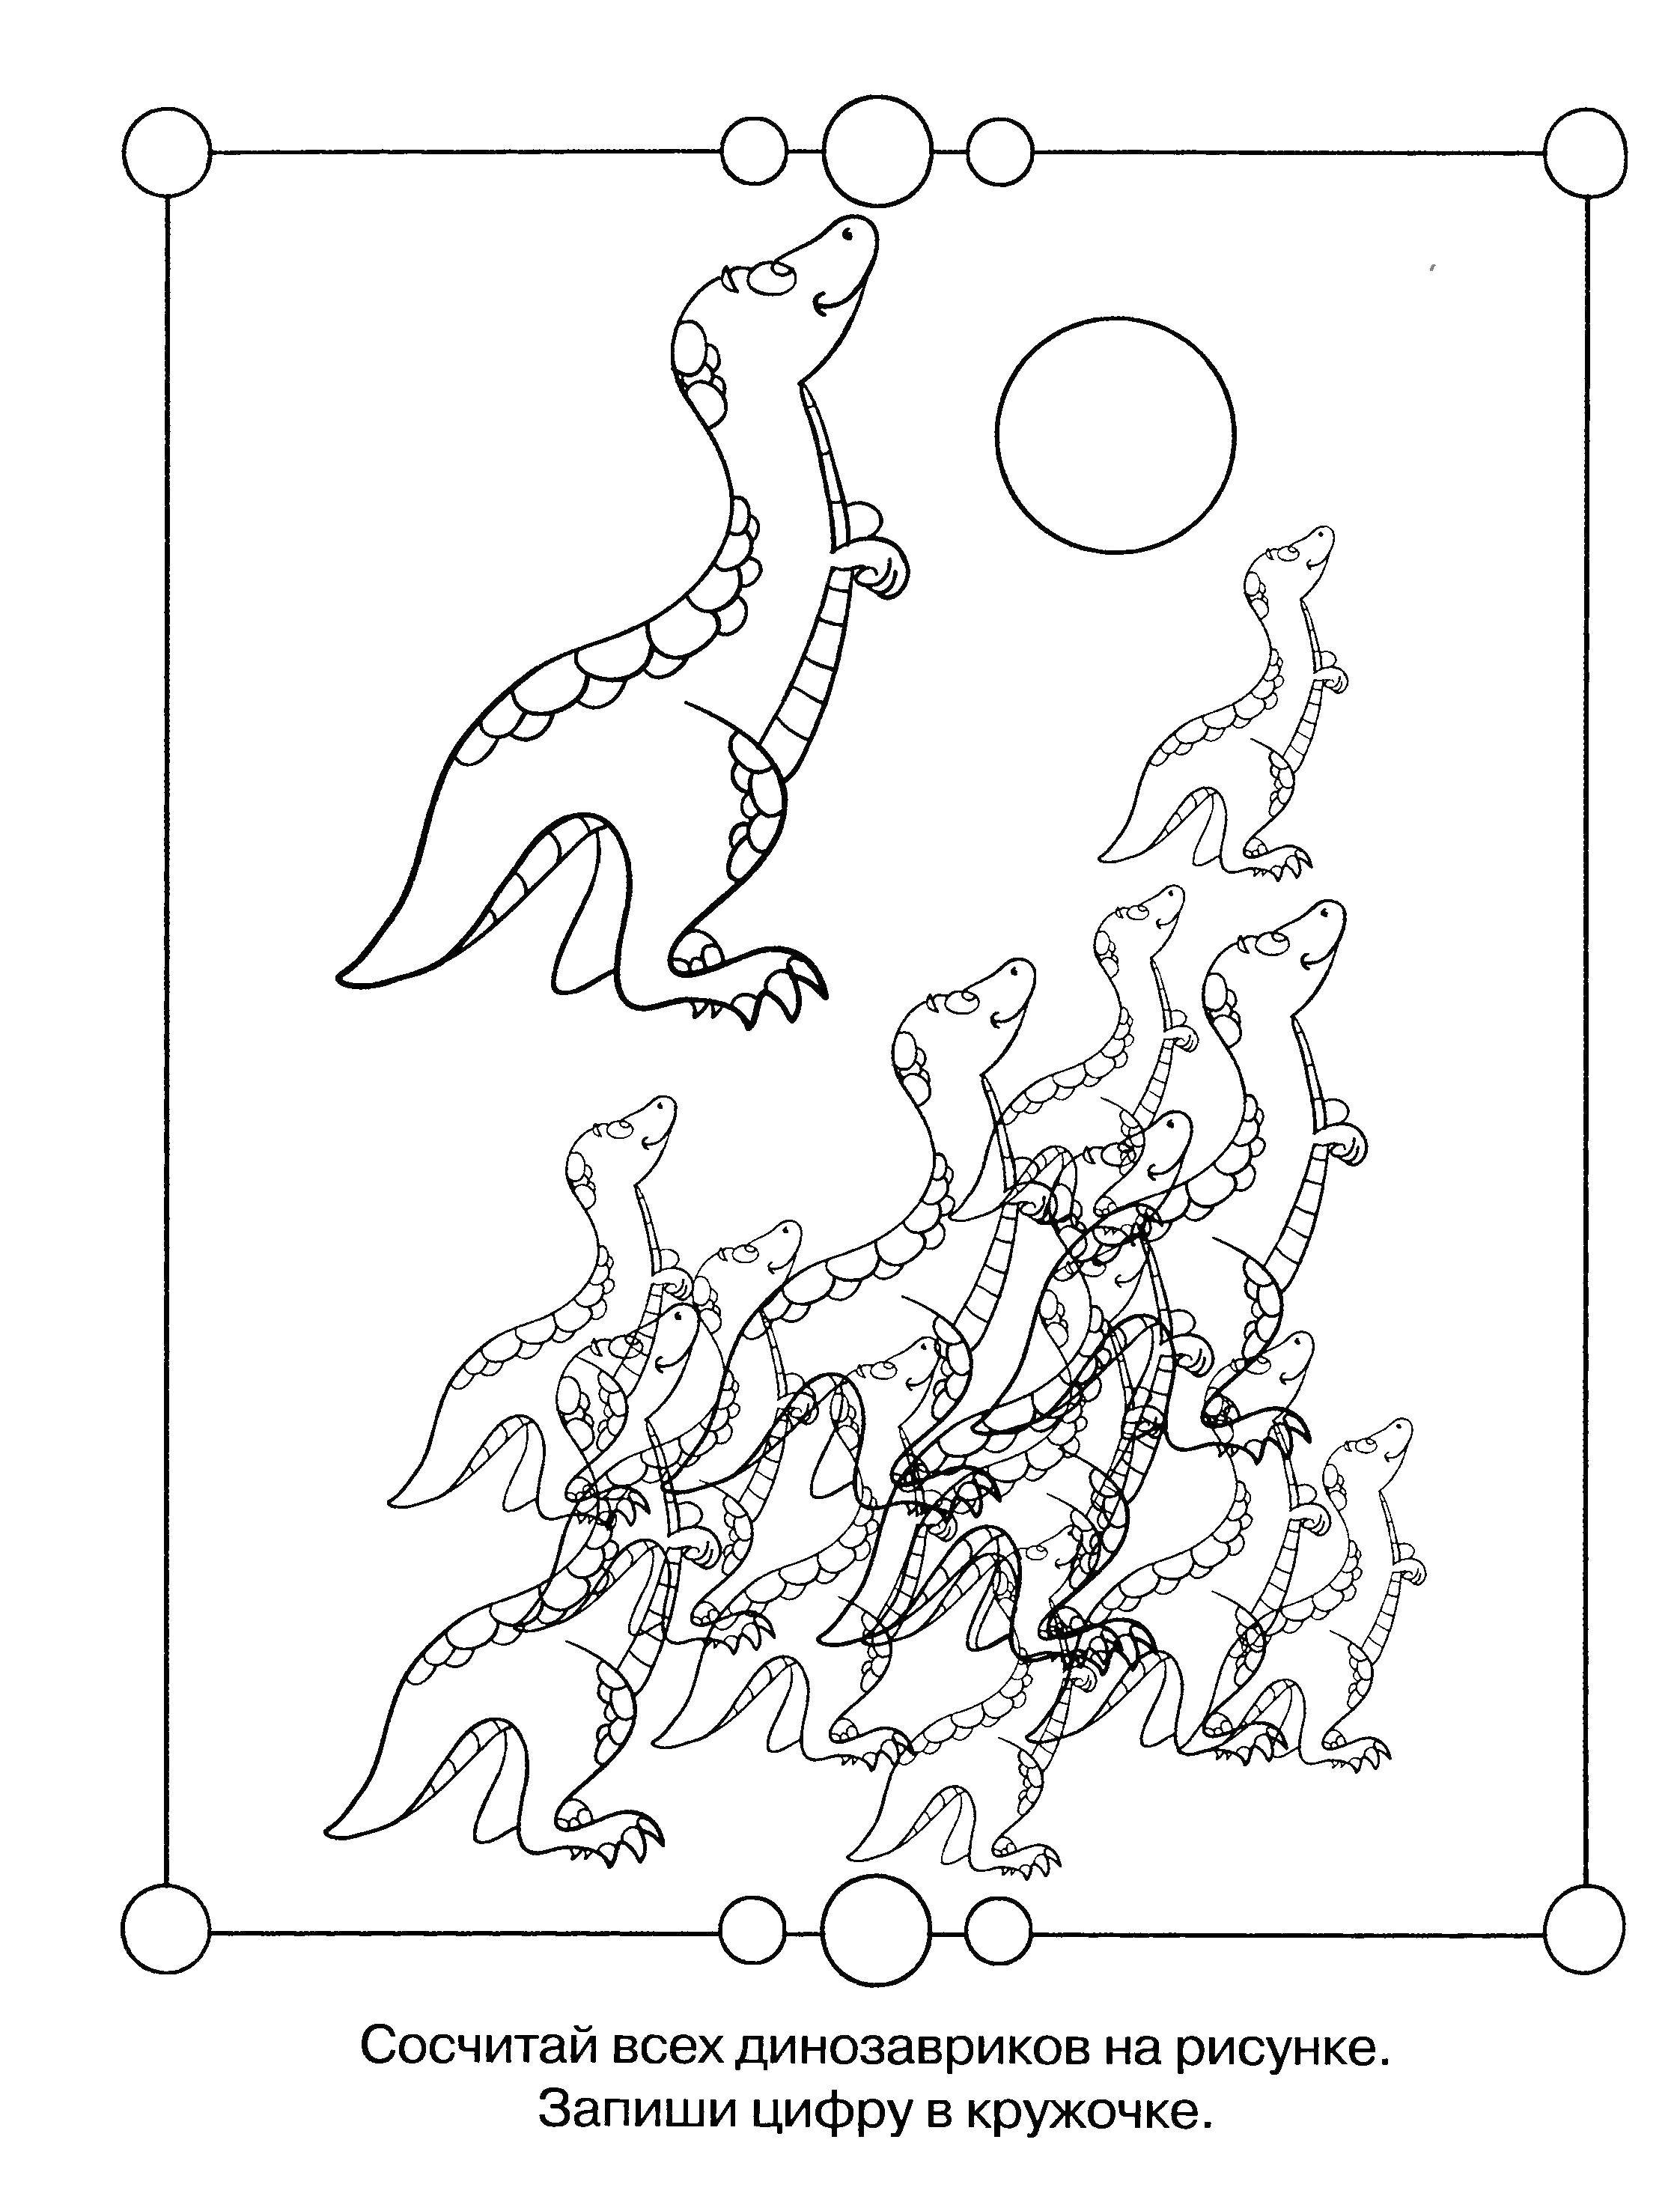 Coloring How many dinosaurs are here?. Category riddles for kids. Tags:  Teaching coloring, logic.